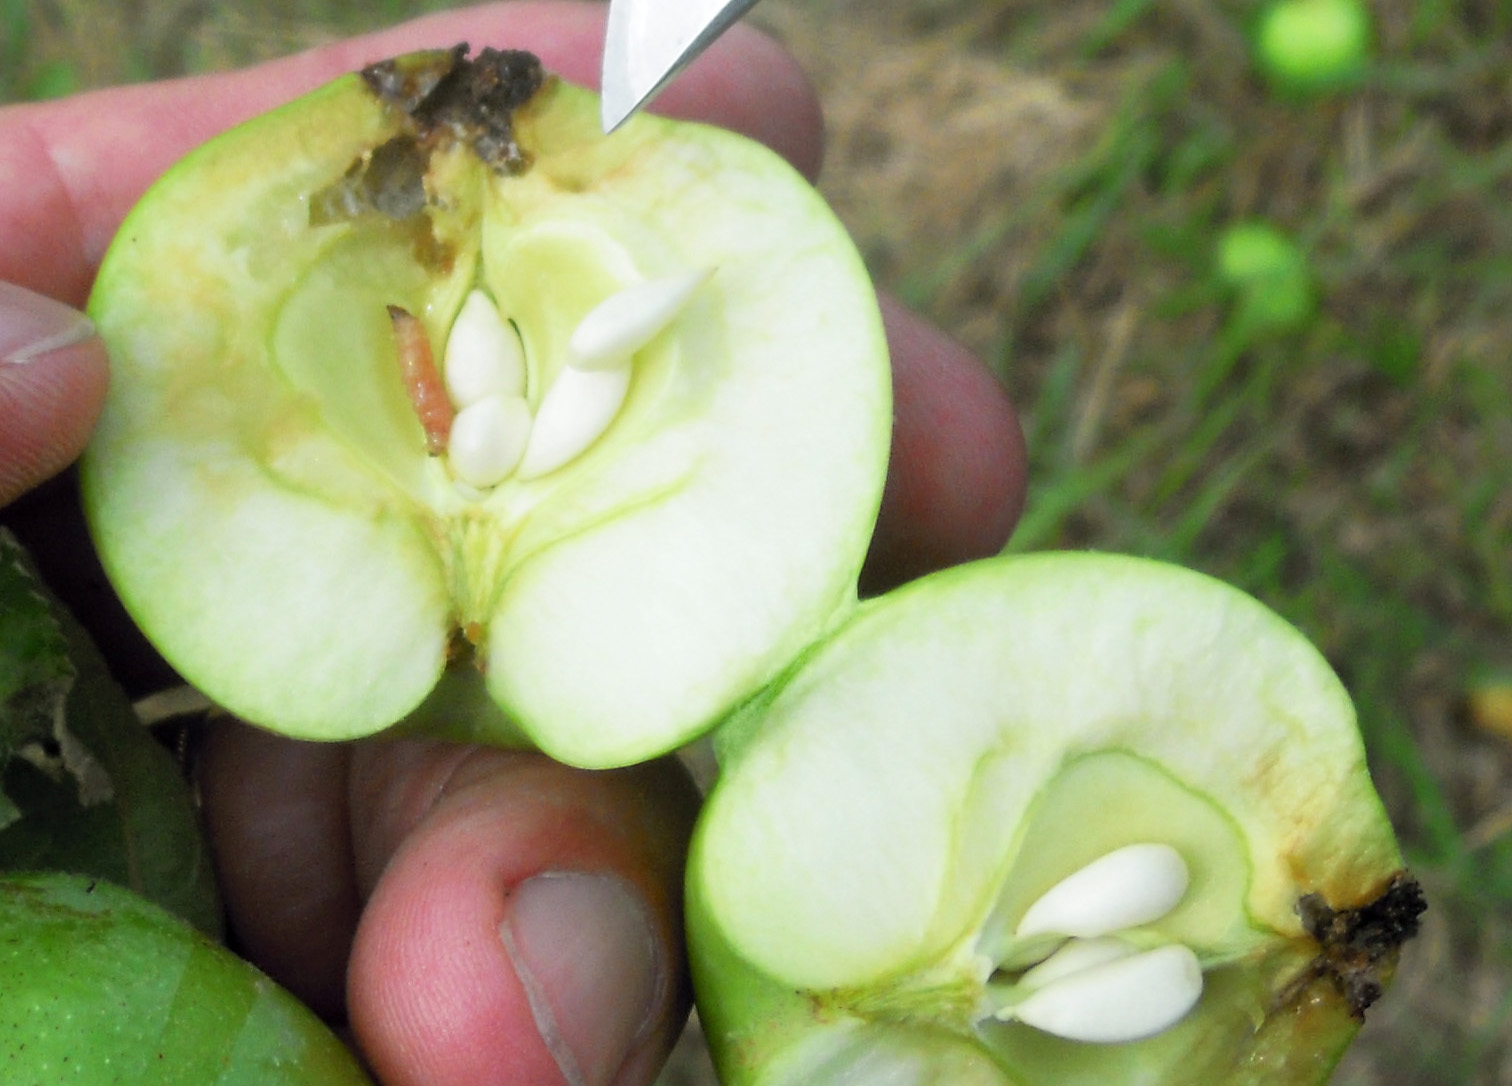 An apple cut in half with codling moth larva on the inside.